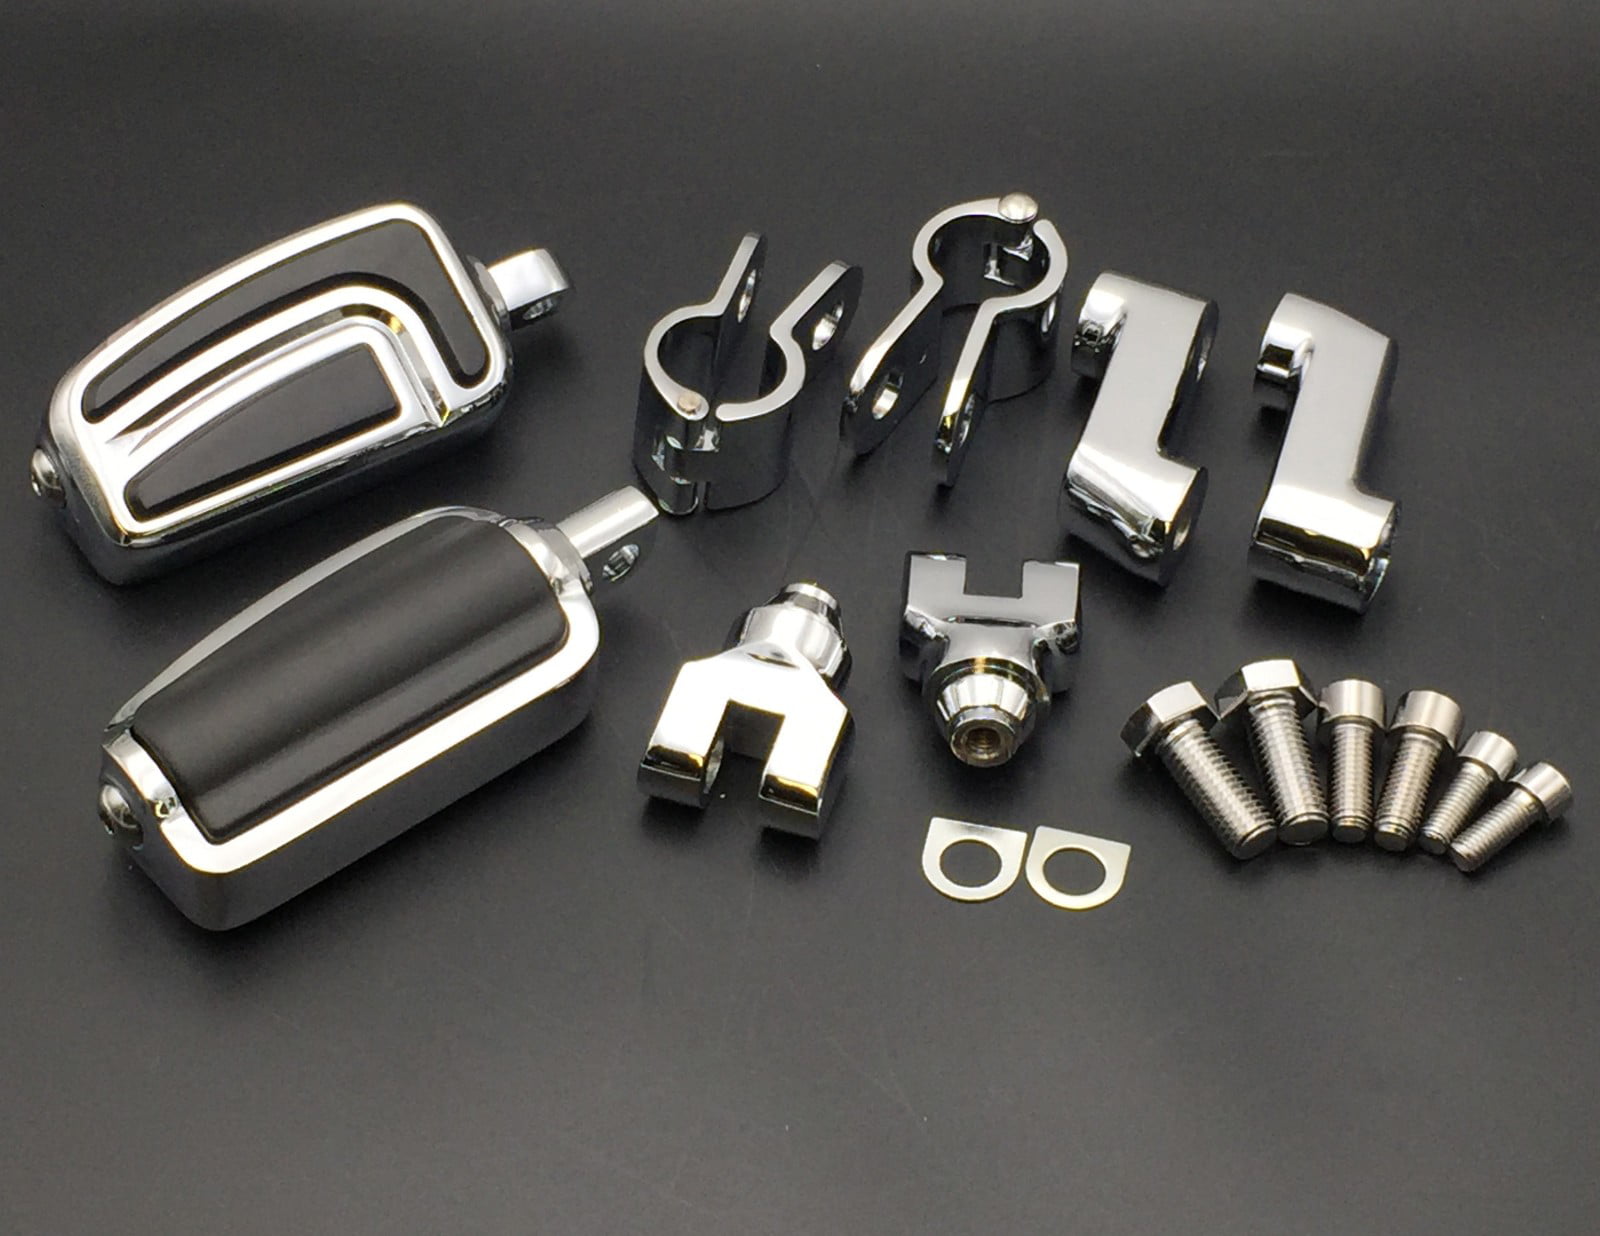 Chrome Spike Passenger Foot Pegs Rest For Harley Touring Road King Street Glide